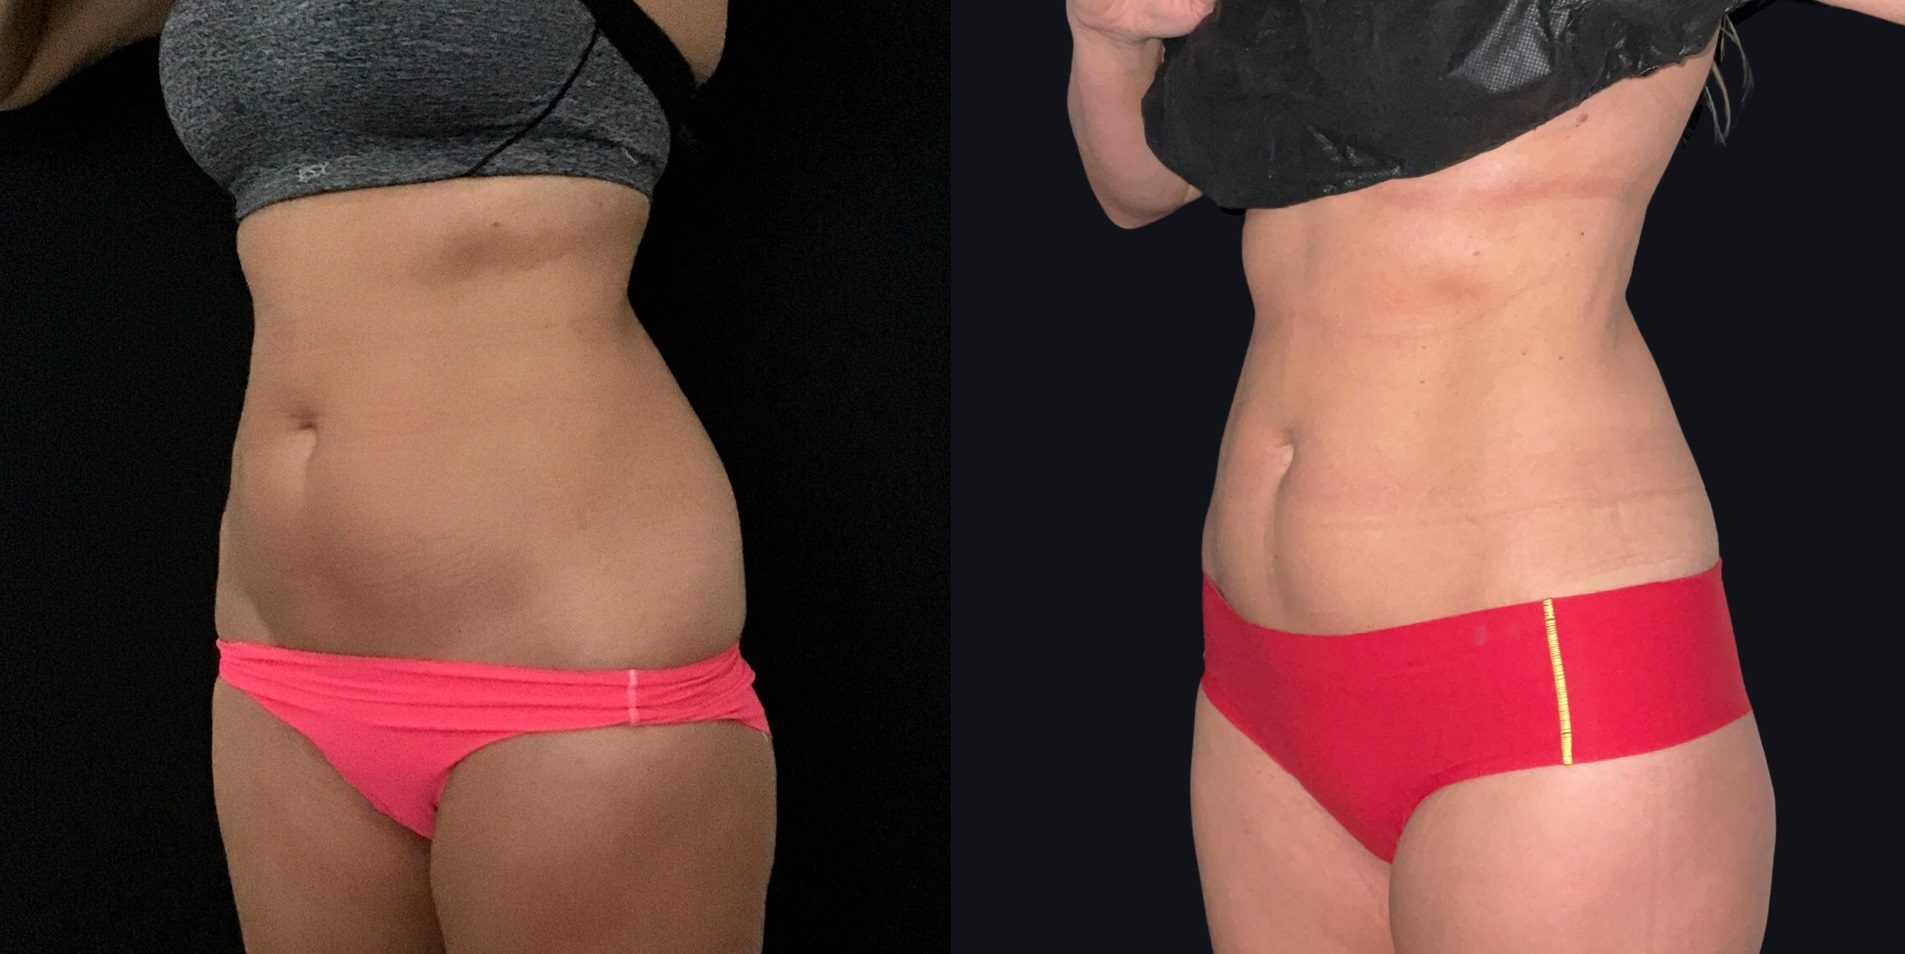 coolsculpting fat freezing belly fat before and after Ria Murch